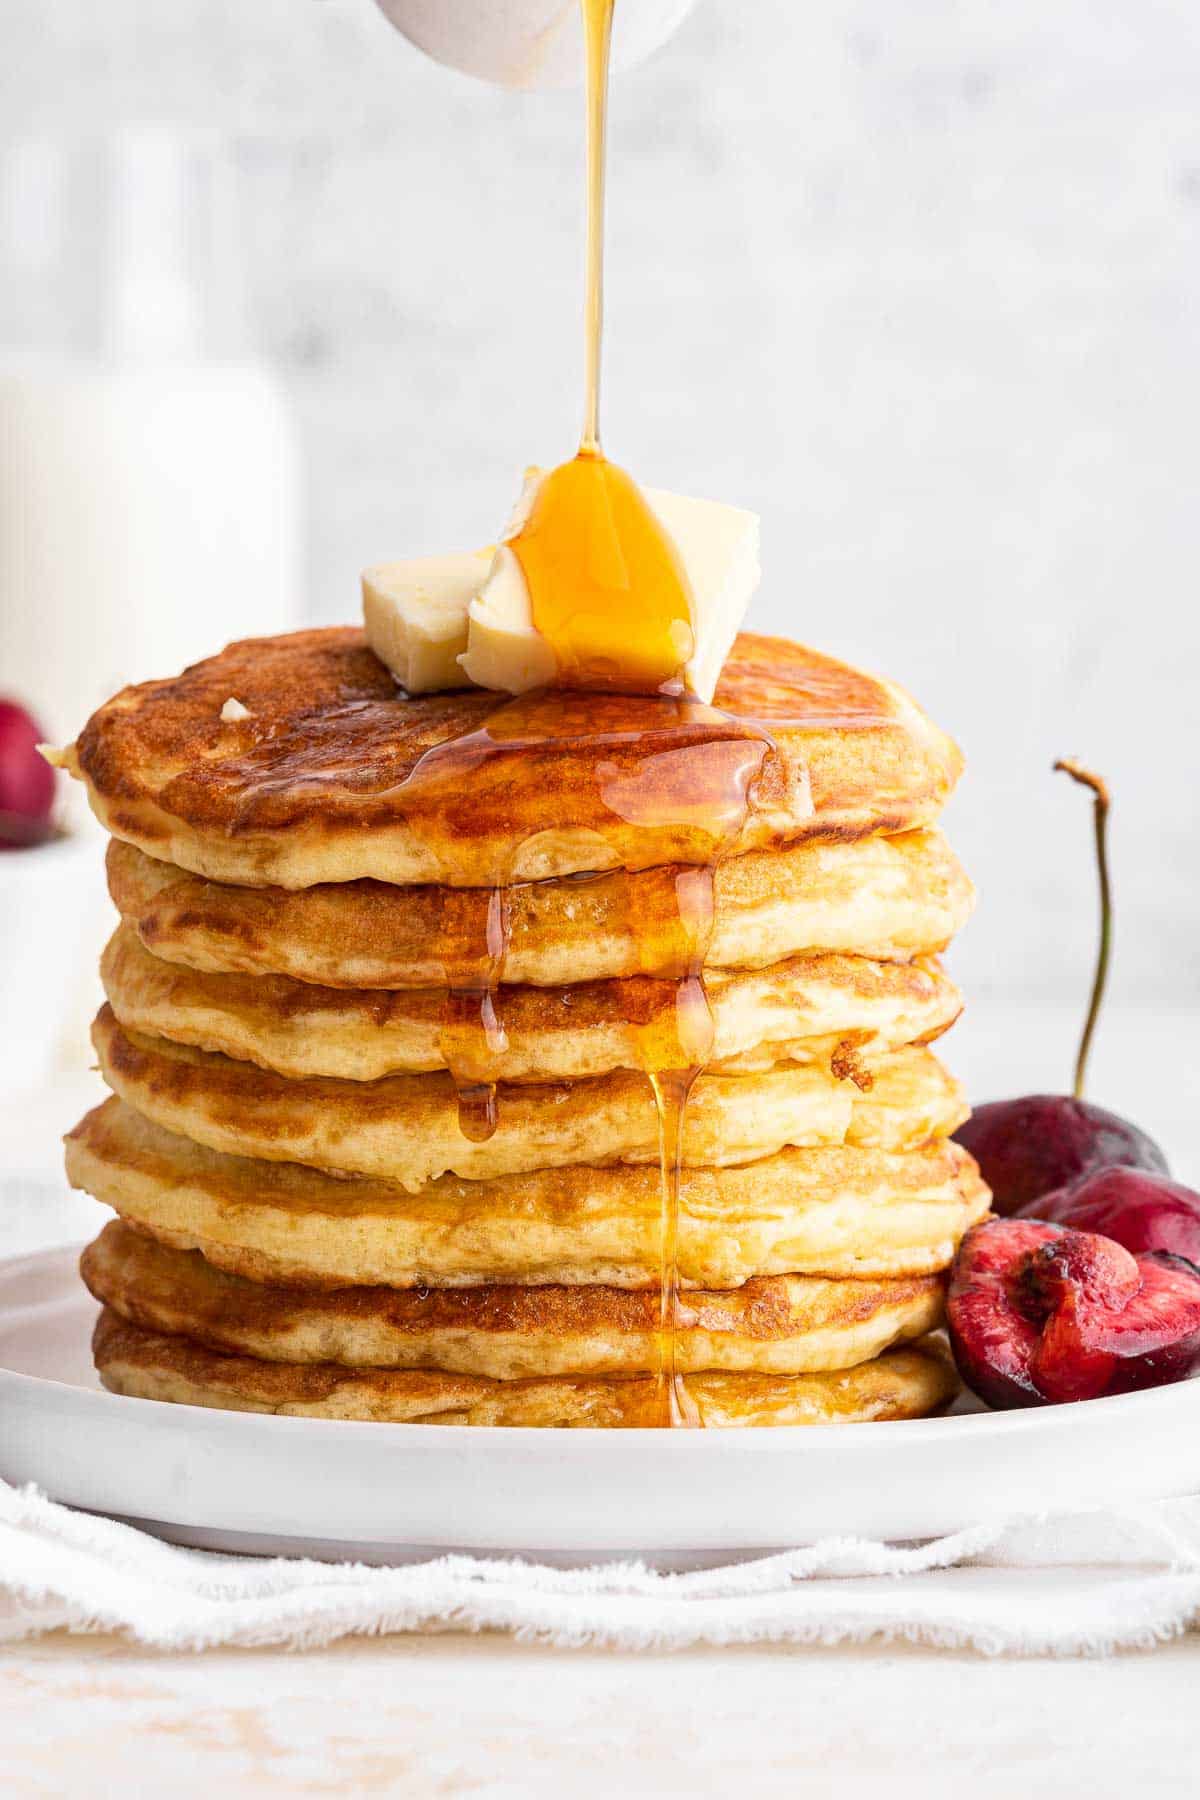 Stack of homemade pancake recipe with butter, syrup and fresh cherries on side.